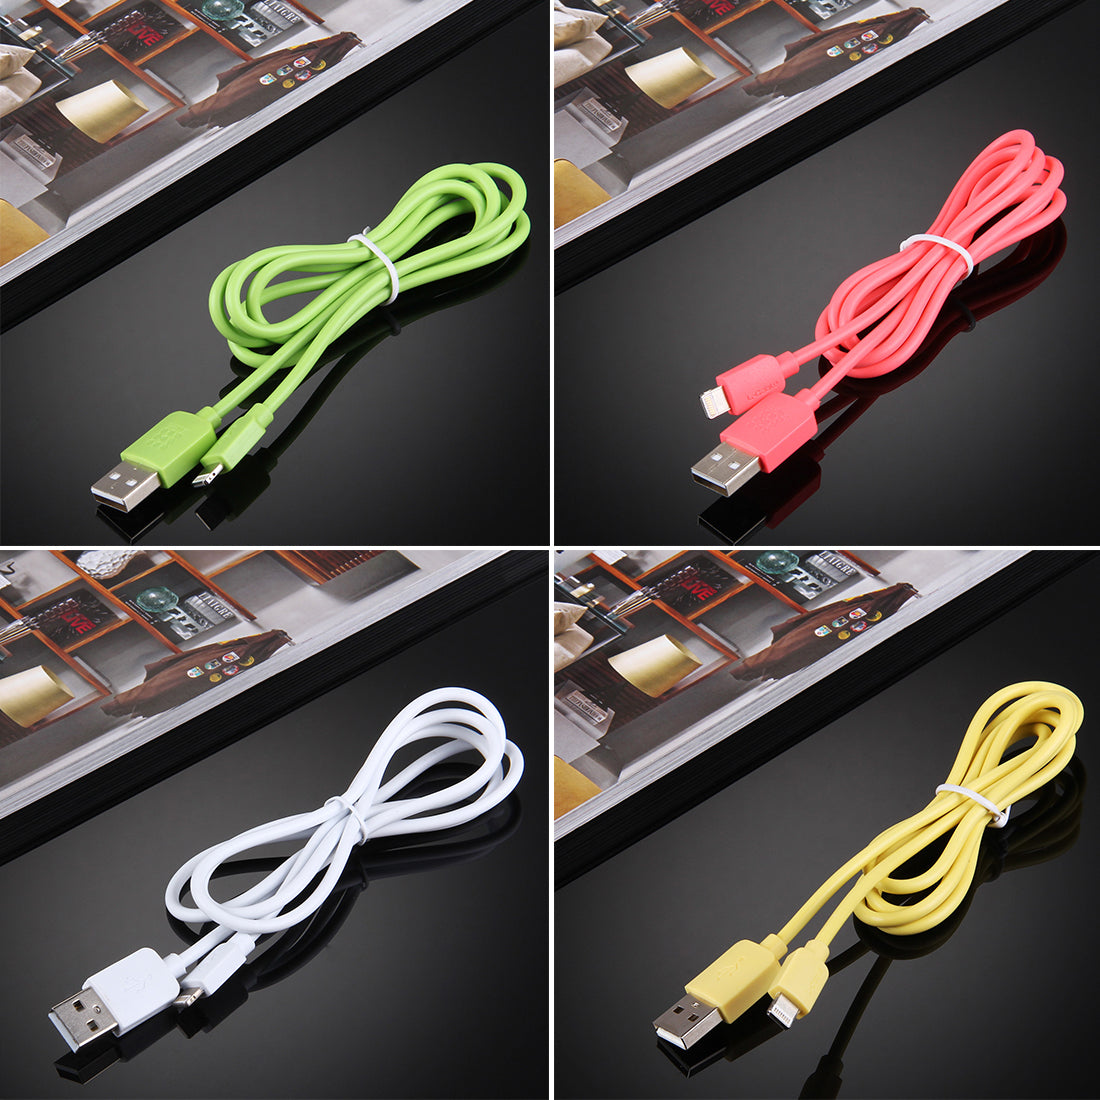 35 PCS Mixed Colors HAWEEL 1m High Speed 35 Cores 8 pin to USB Sync Charging Cable Kit with Candy Cans Package, For iPhone XR / iPhone XS MAX / iPhone X & XS / iPhone 8 & 8 Plus / iPhone 7 & 7 Plus / iPhone 6 & 6s & 6 Plus & 6s Plus / iPad